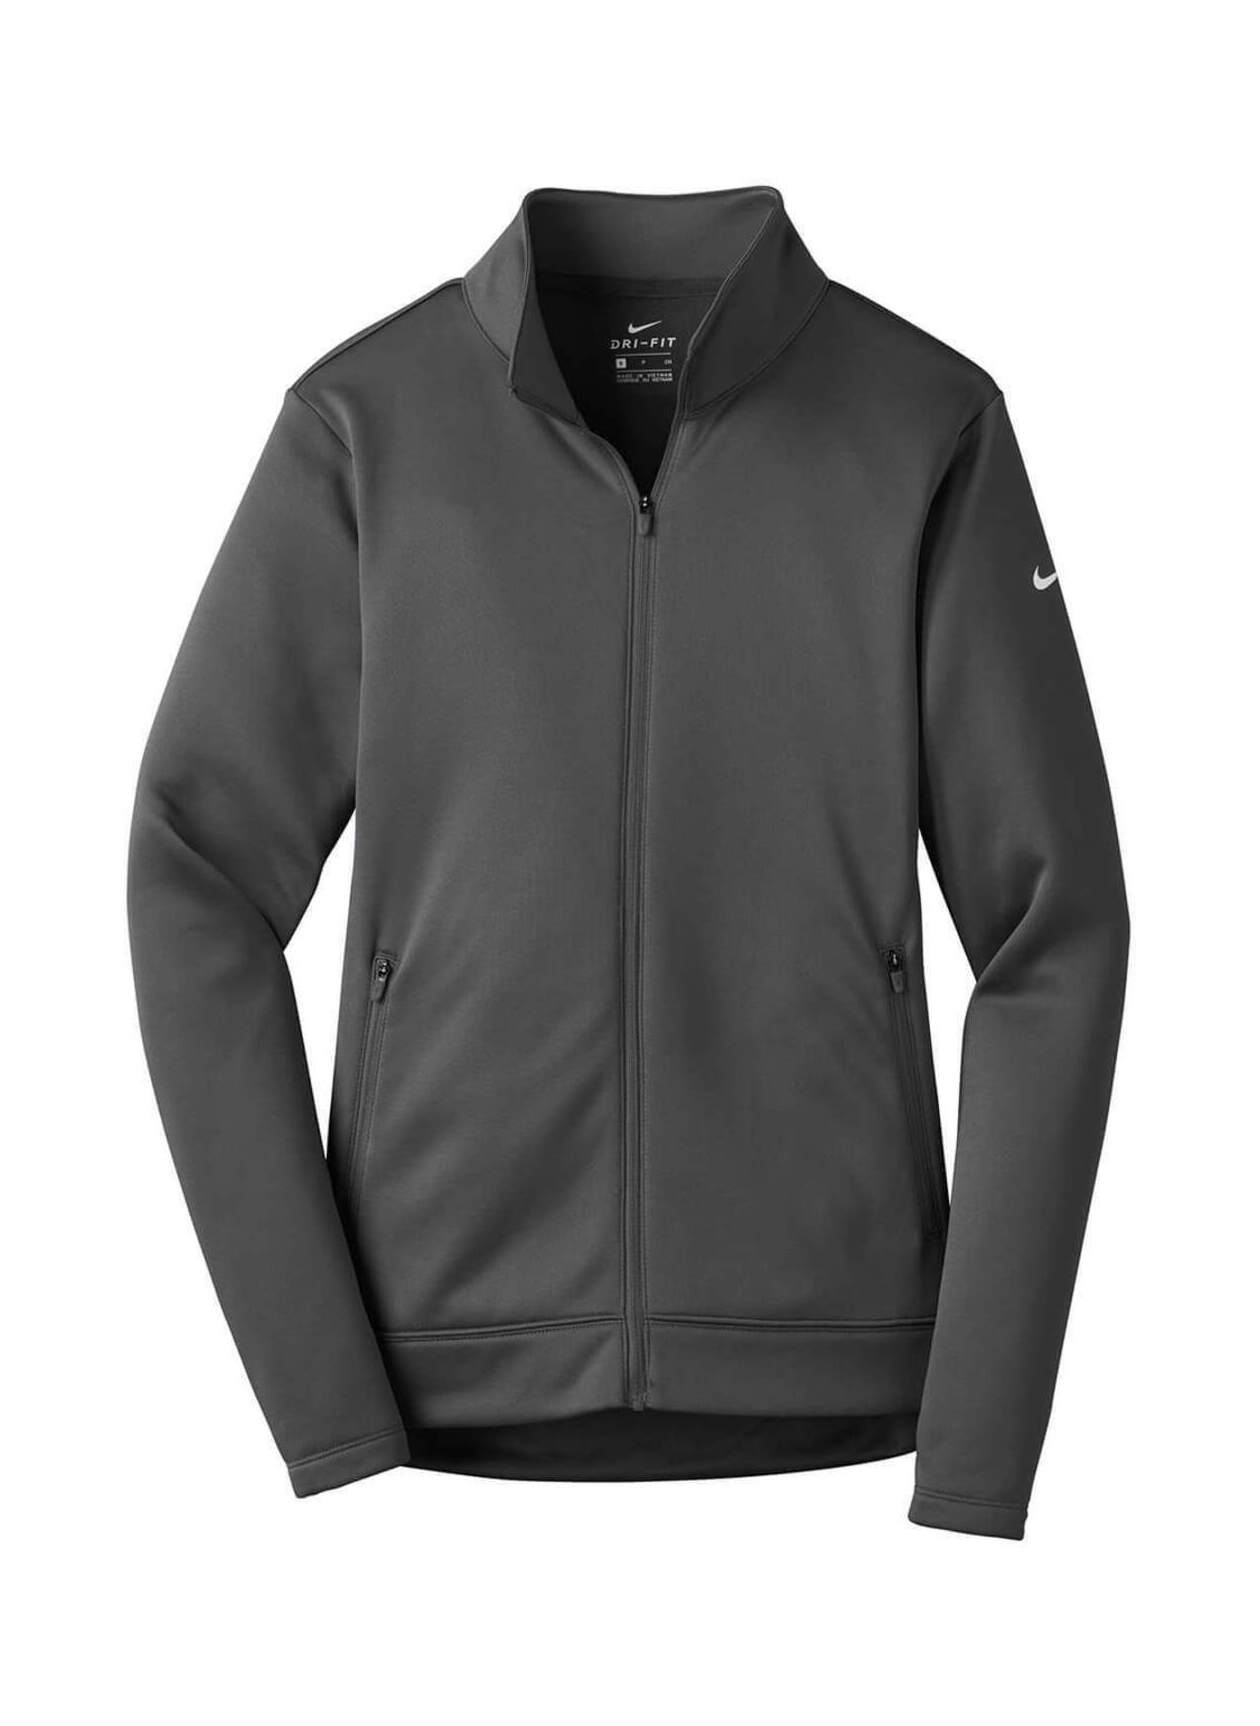 Nike Women's Anthracite Therma-FIT Fleece Jacket